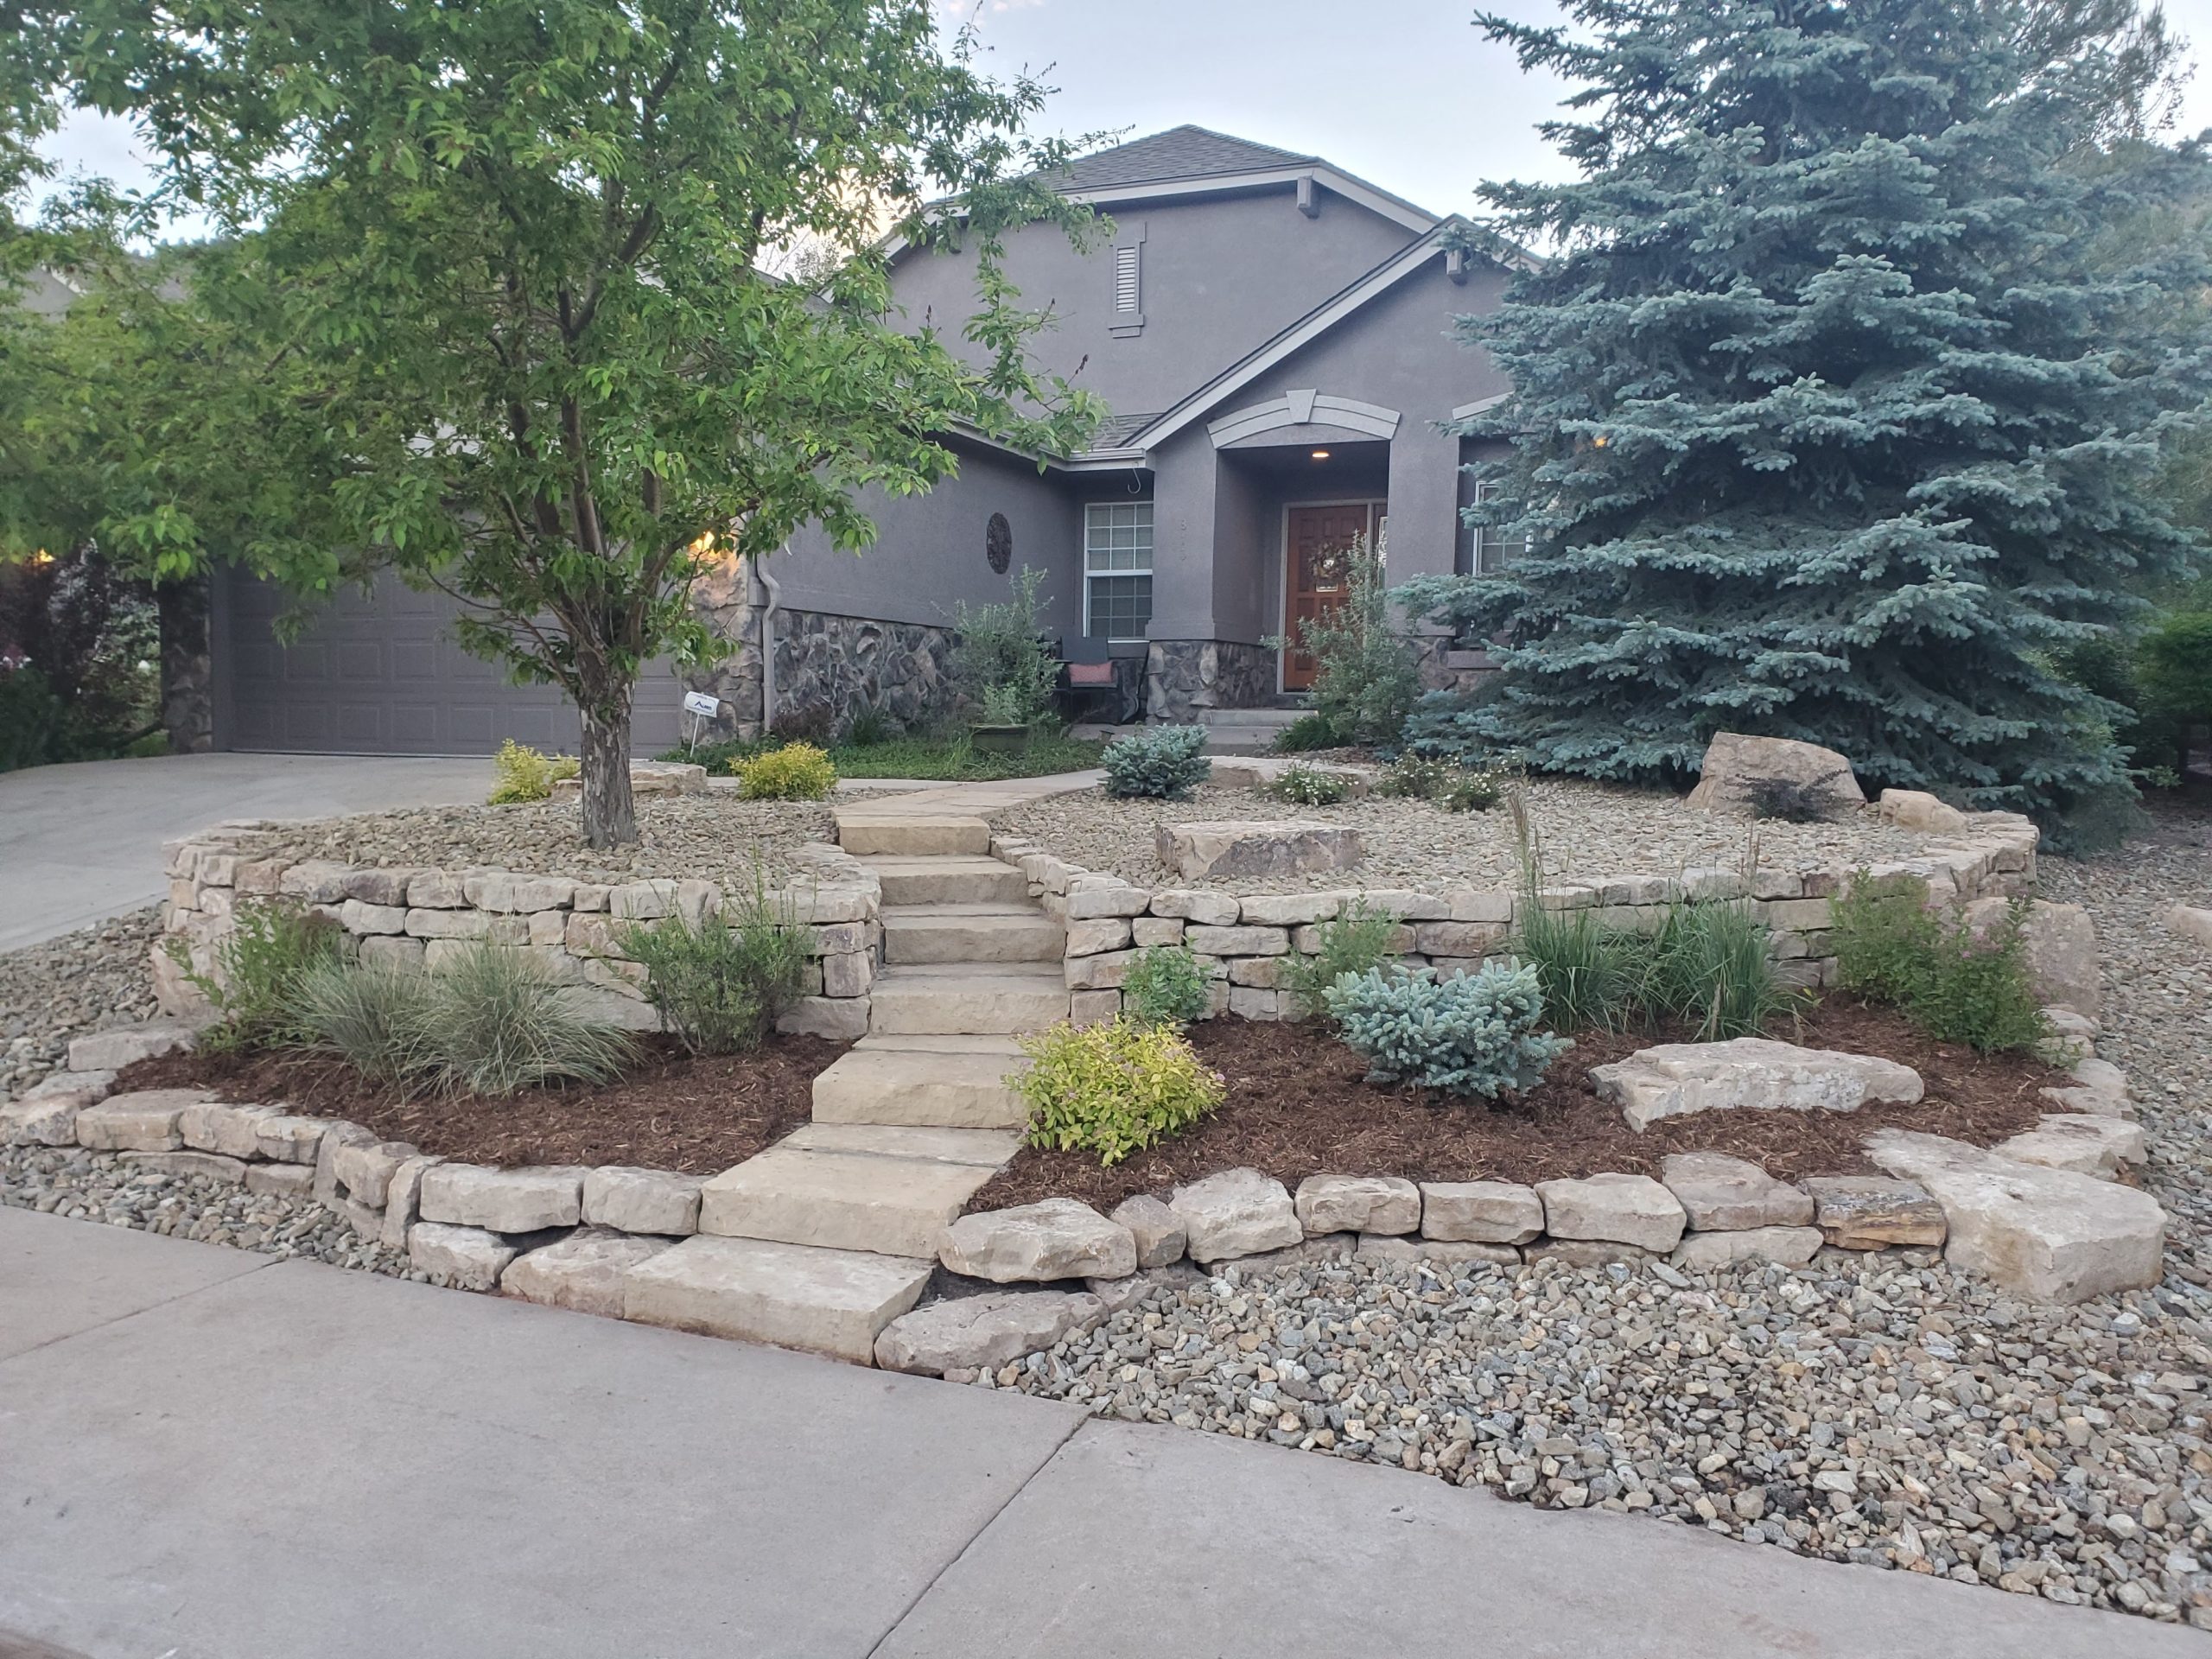 Finished front of house with steps, landscapping, and small retaining walls